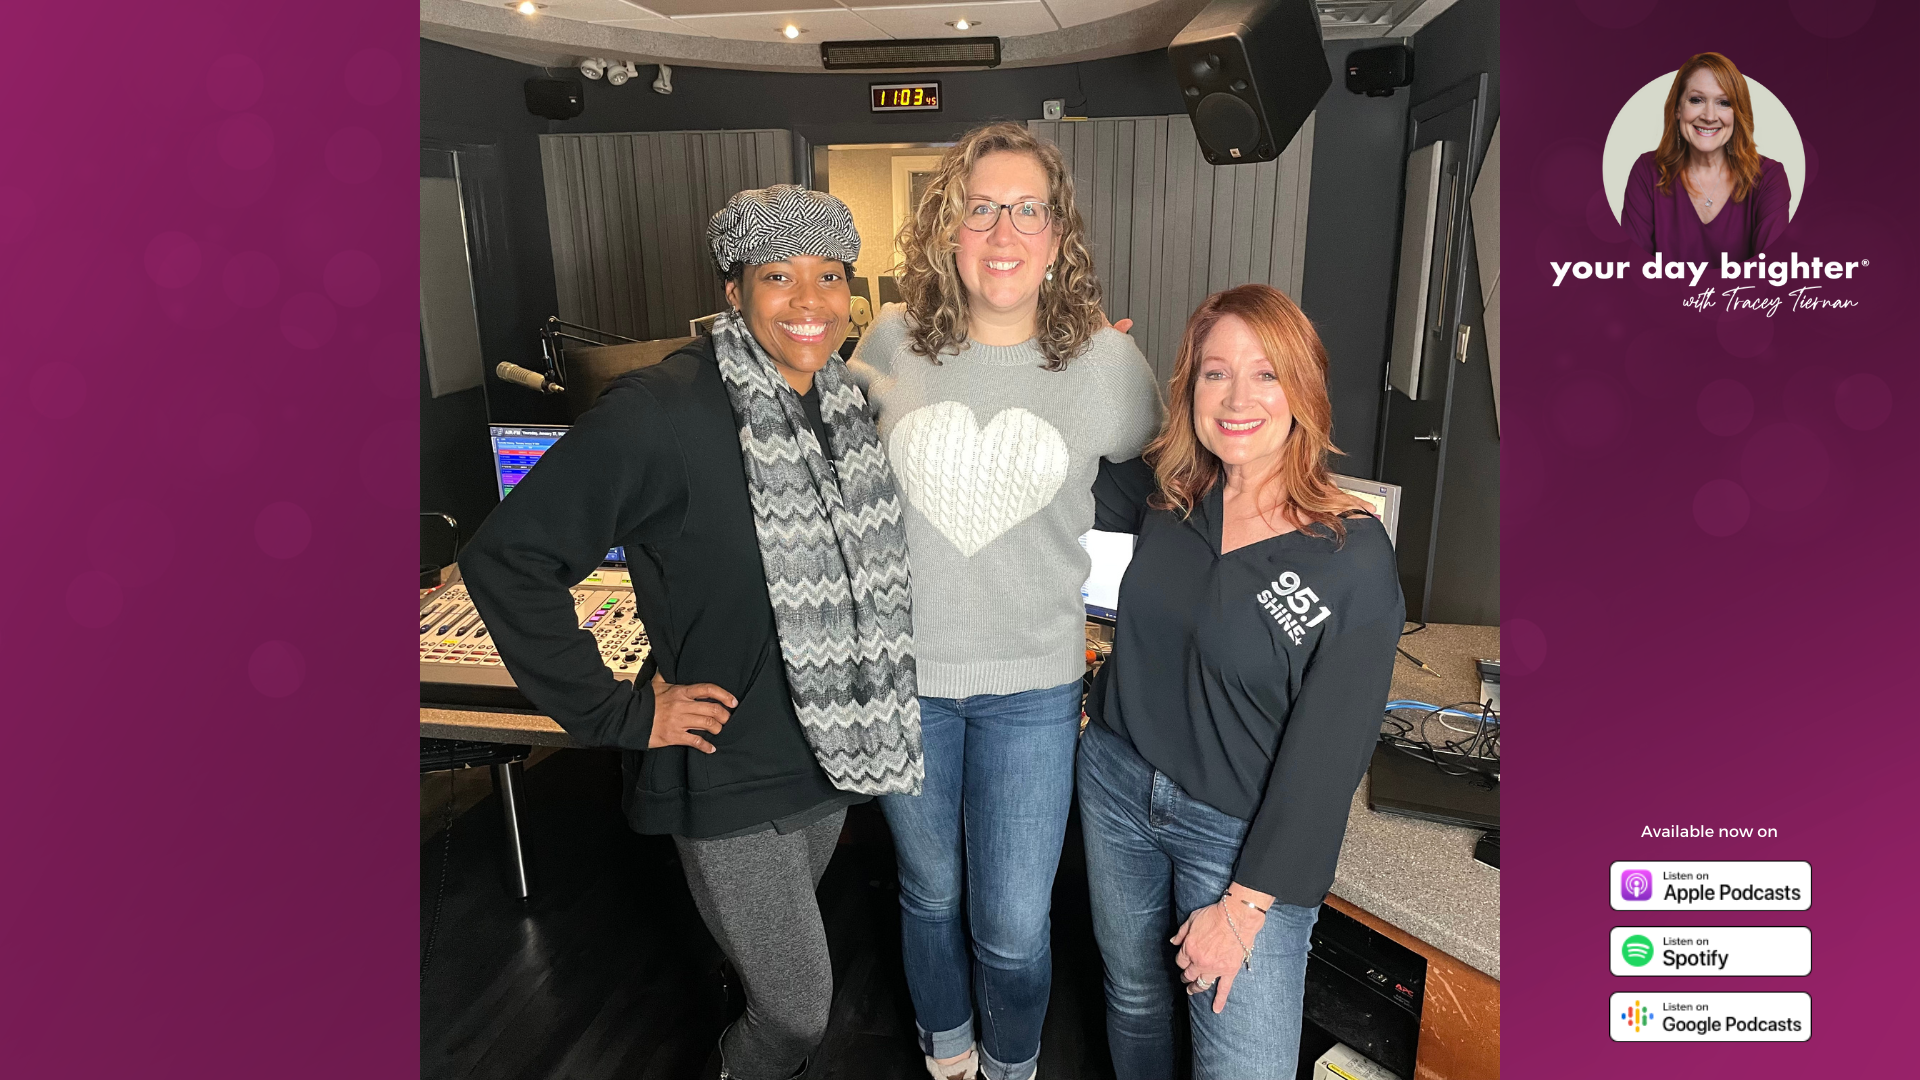 Christina, Erin, and Tracey standing side by side smiling in the radio station studio